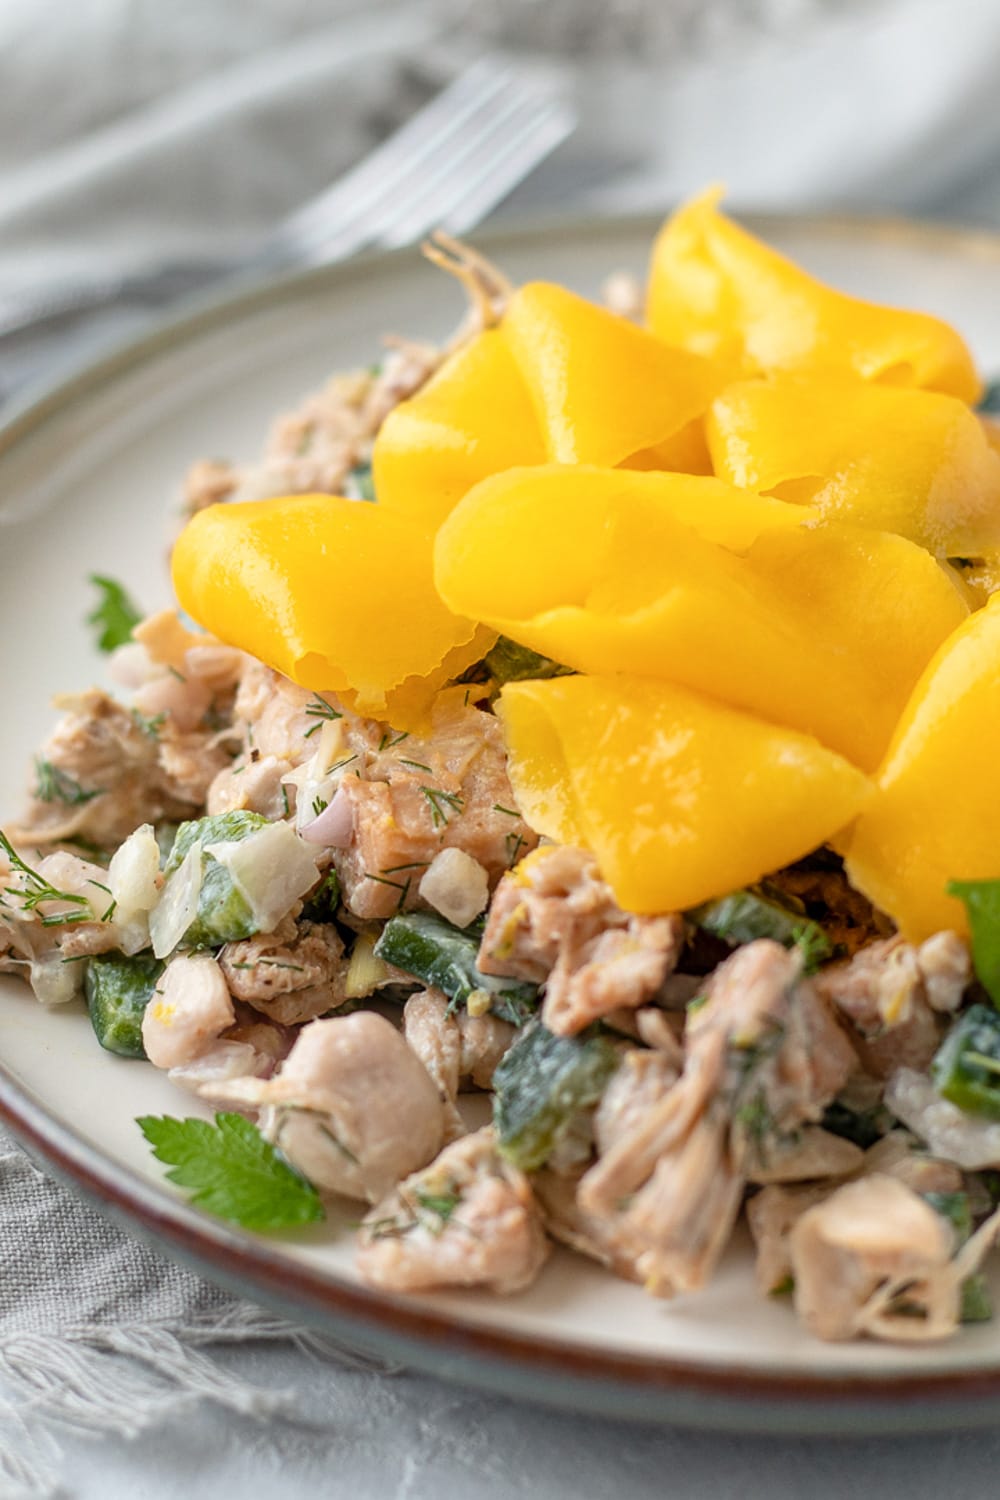 jackfruit salad topped with ribbons of mango and fresh dill.